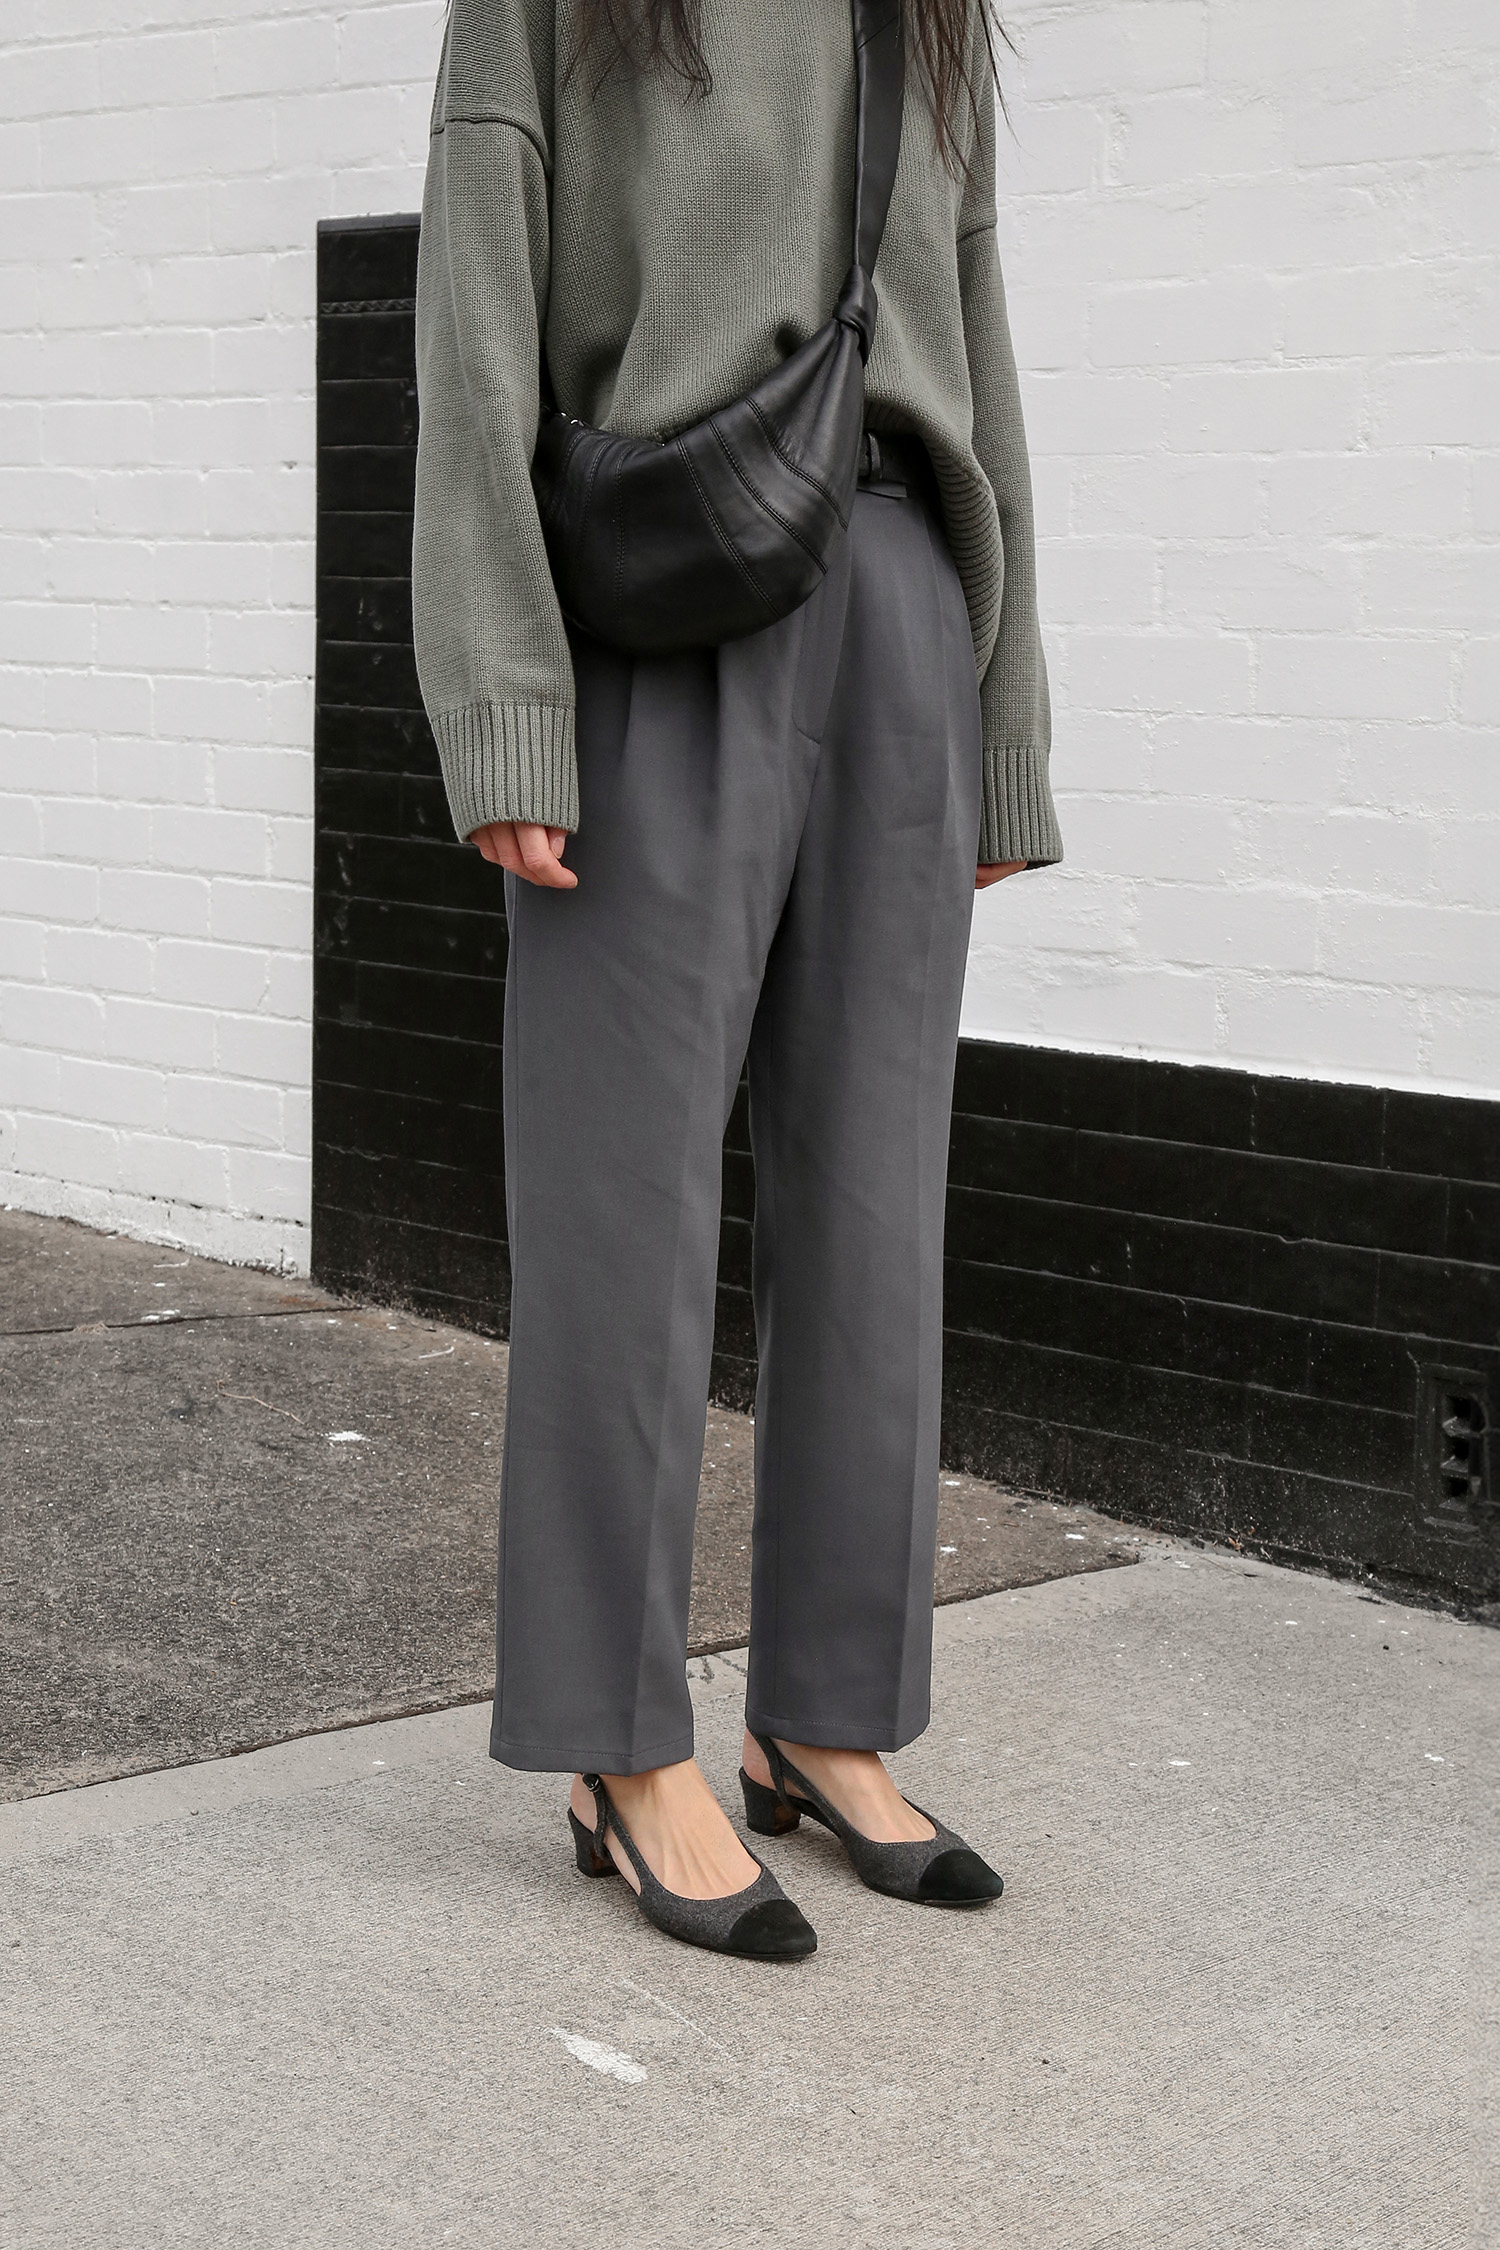 Oversized sweater worn with tapered cropped trousers